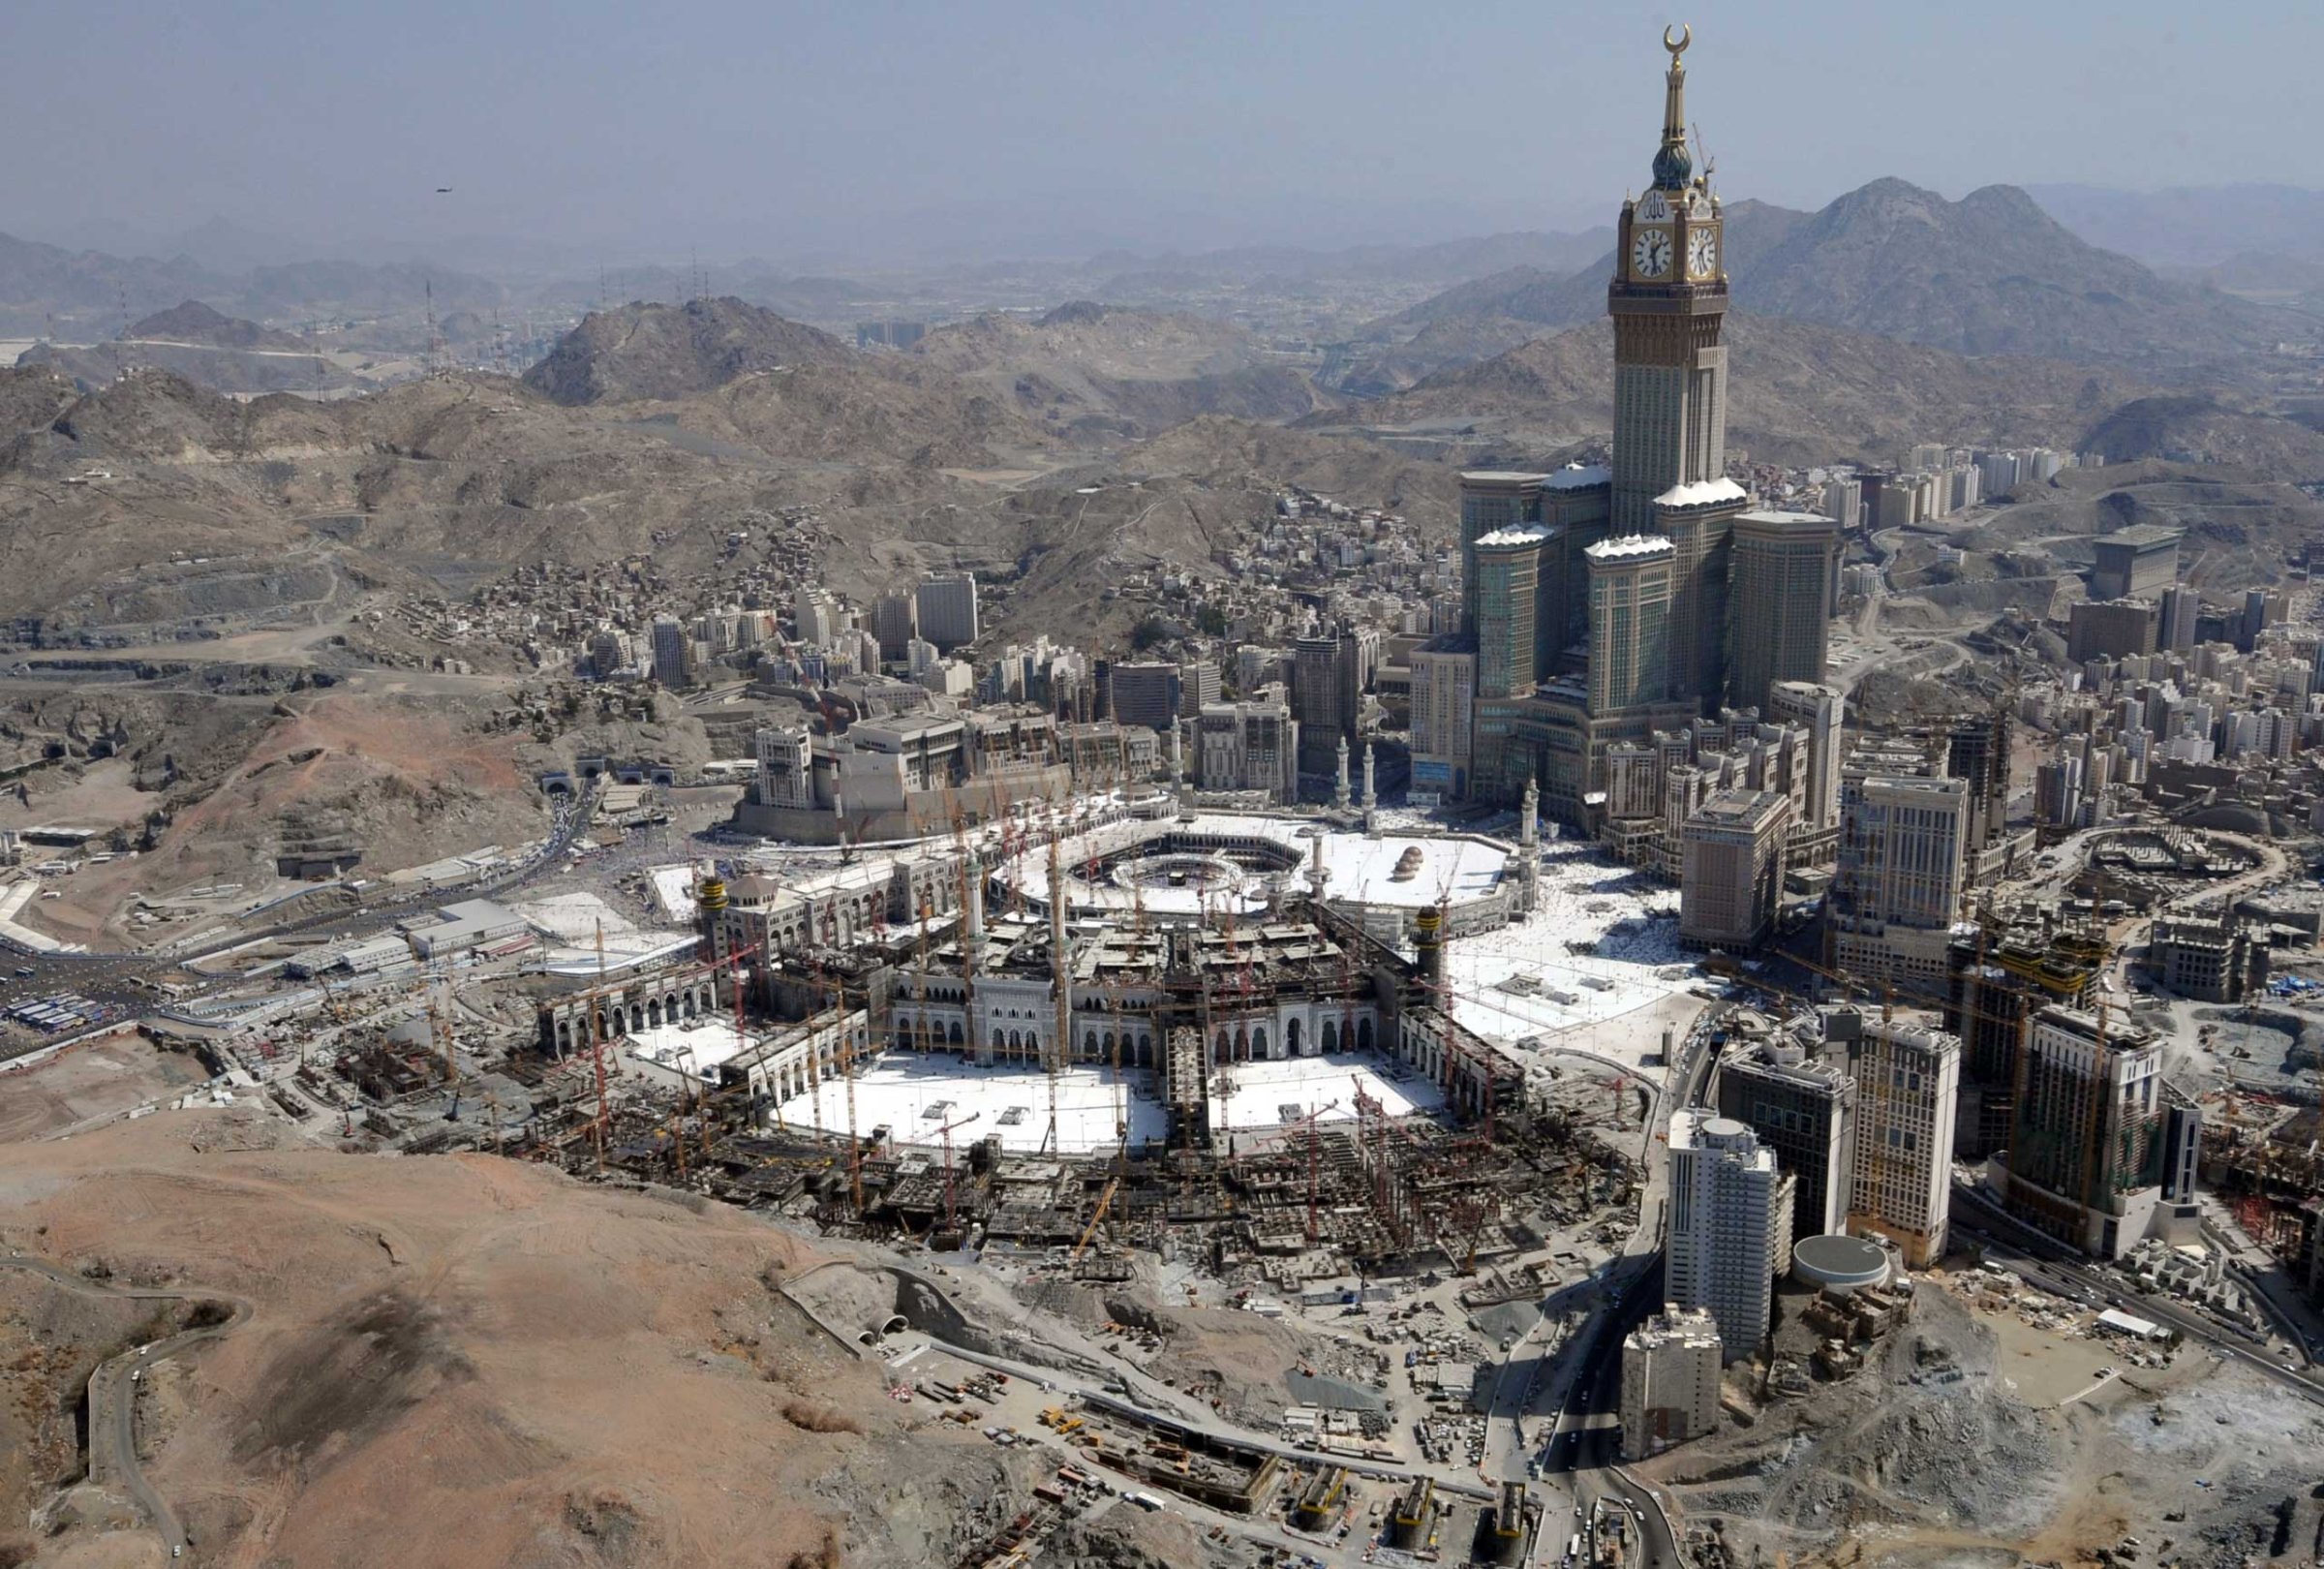 An aerial view shows the Clock Tower, the Grand Mosque, and surrounding constructions sites in the holy city of Mecca, in 2013.